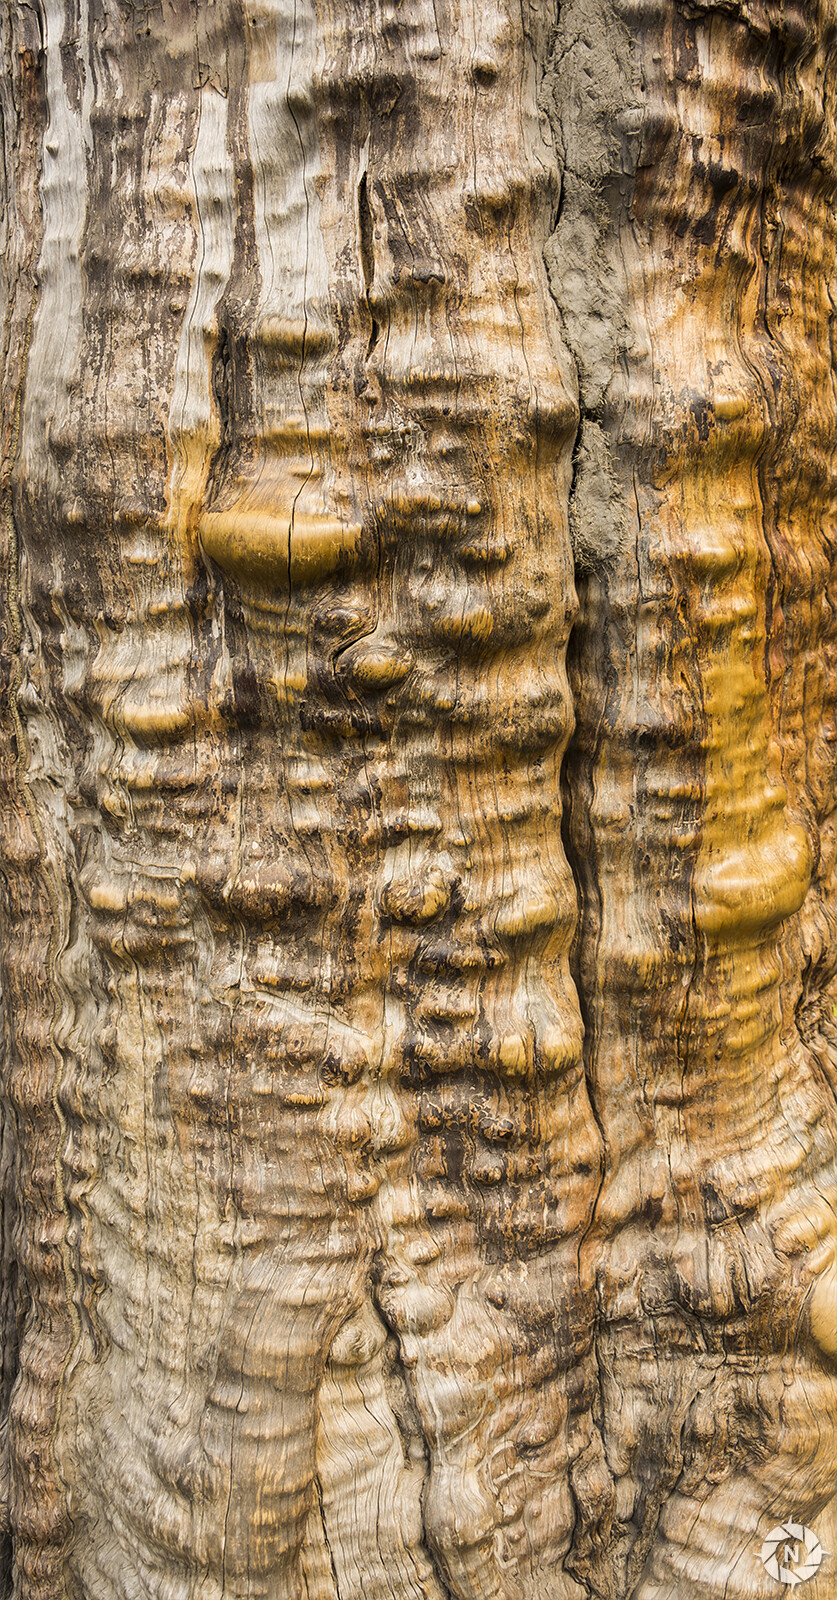 From the Texture Photo Pack: Tree Barks Volume 2

https://www.artstation.com/a/165736